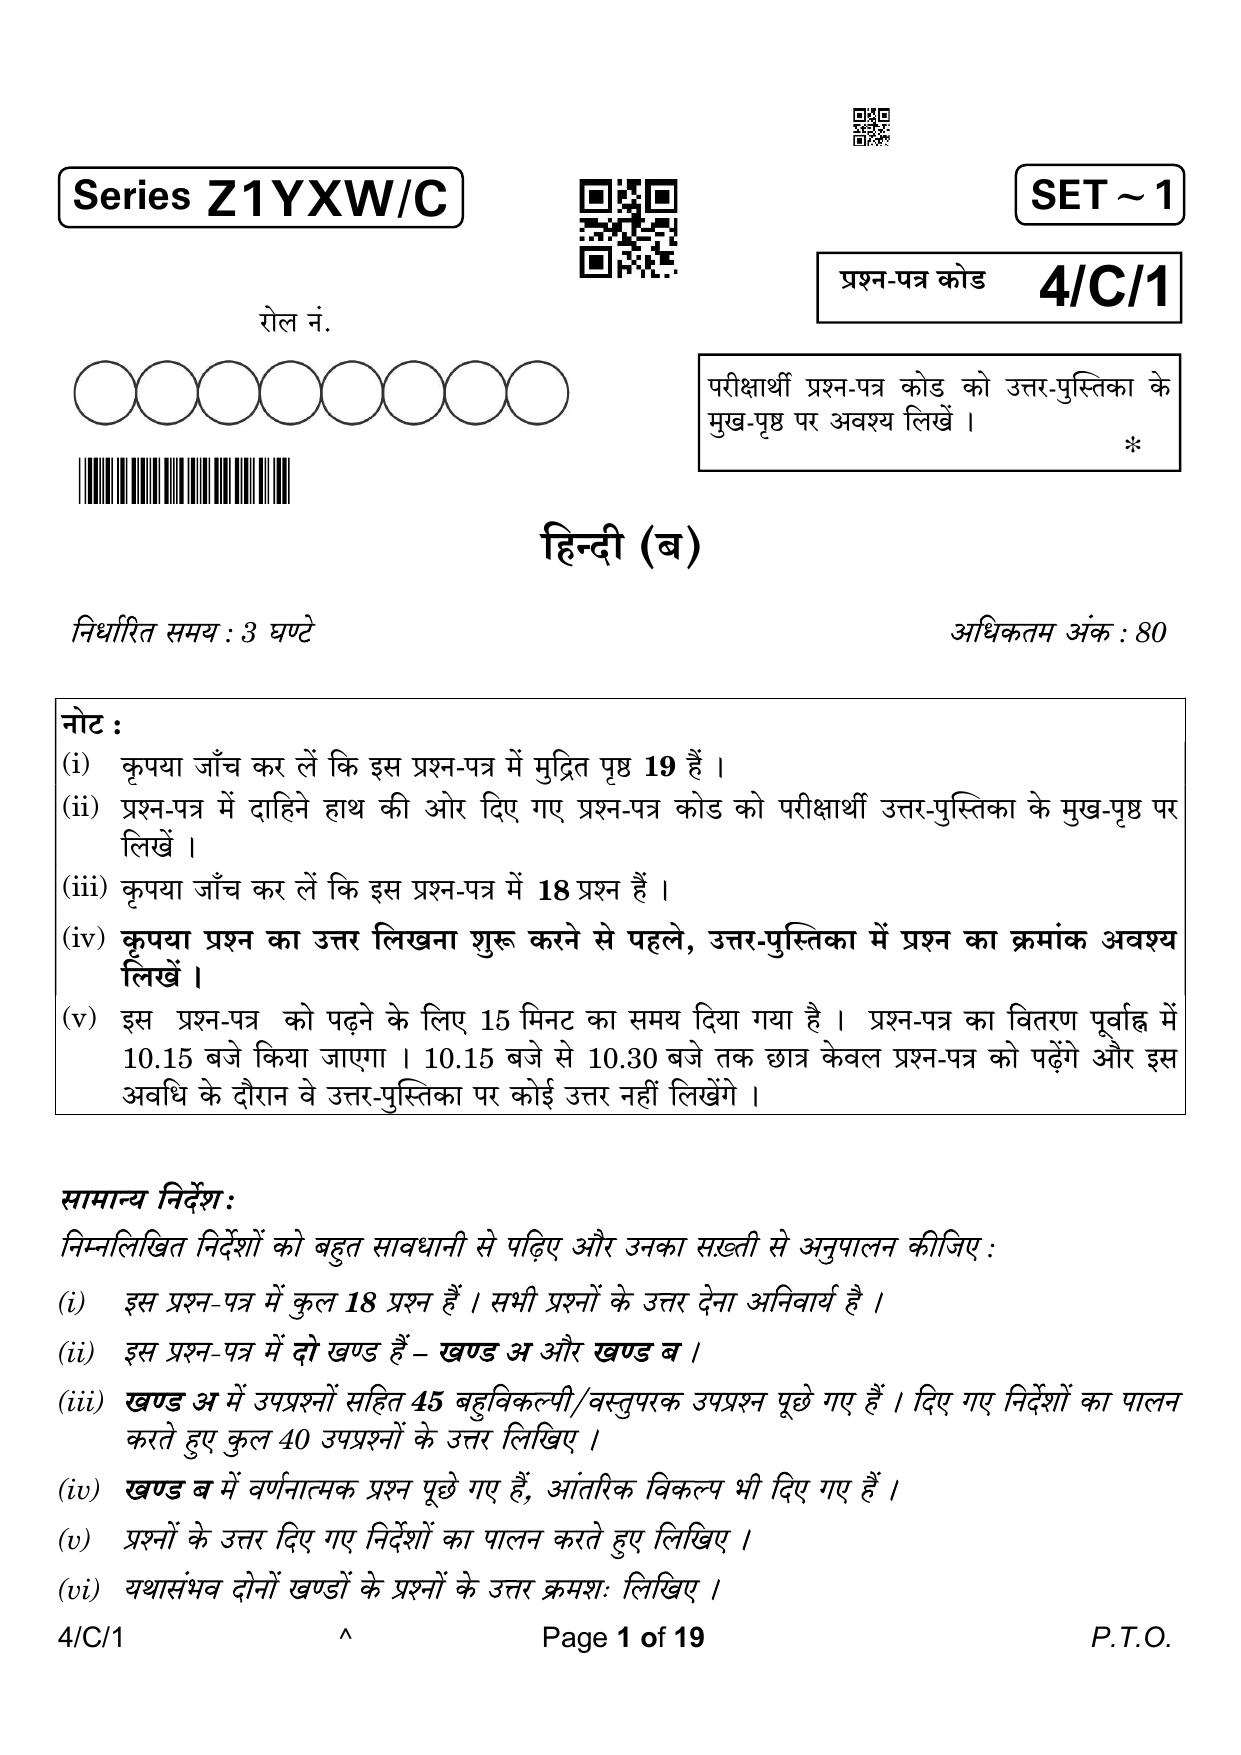 CBSE Class 10 4-1 Hindi B 2023 (Compartment) Question Paper - Page 1